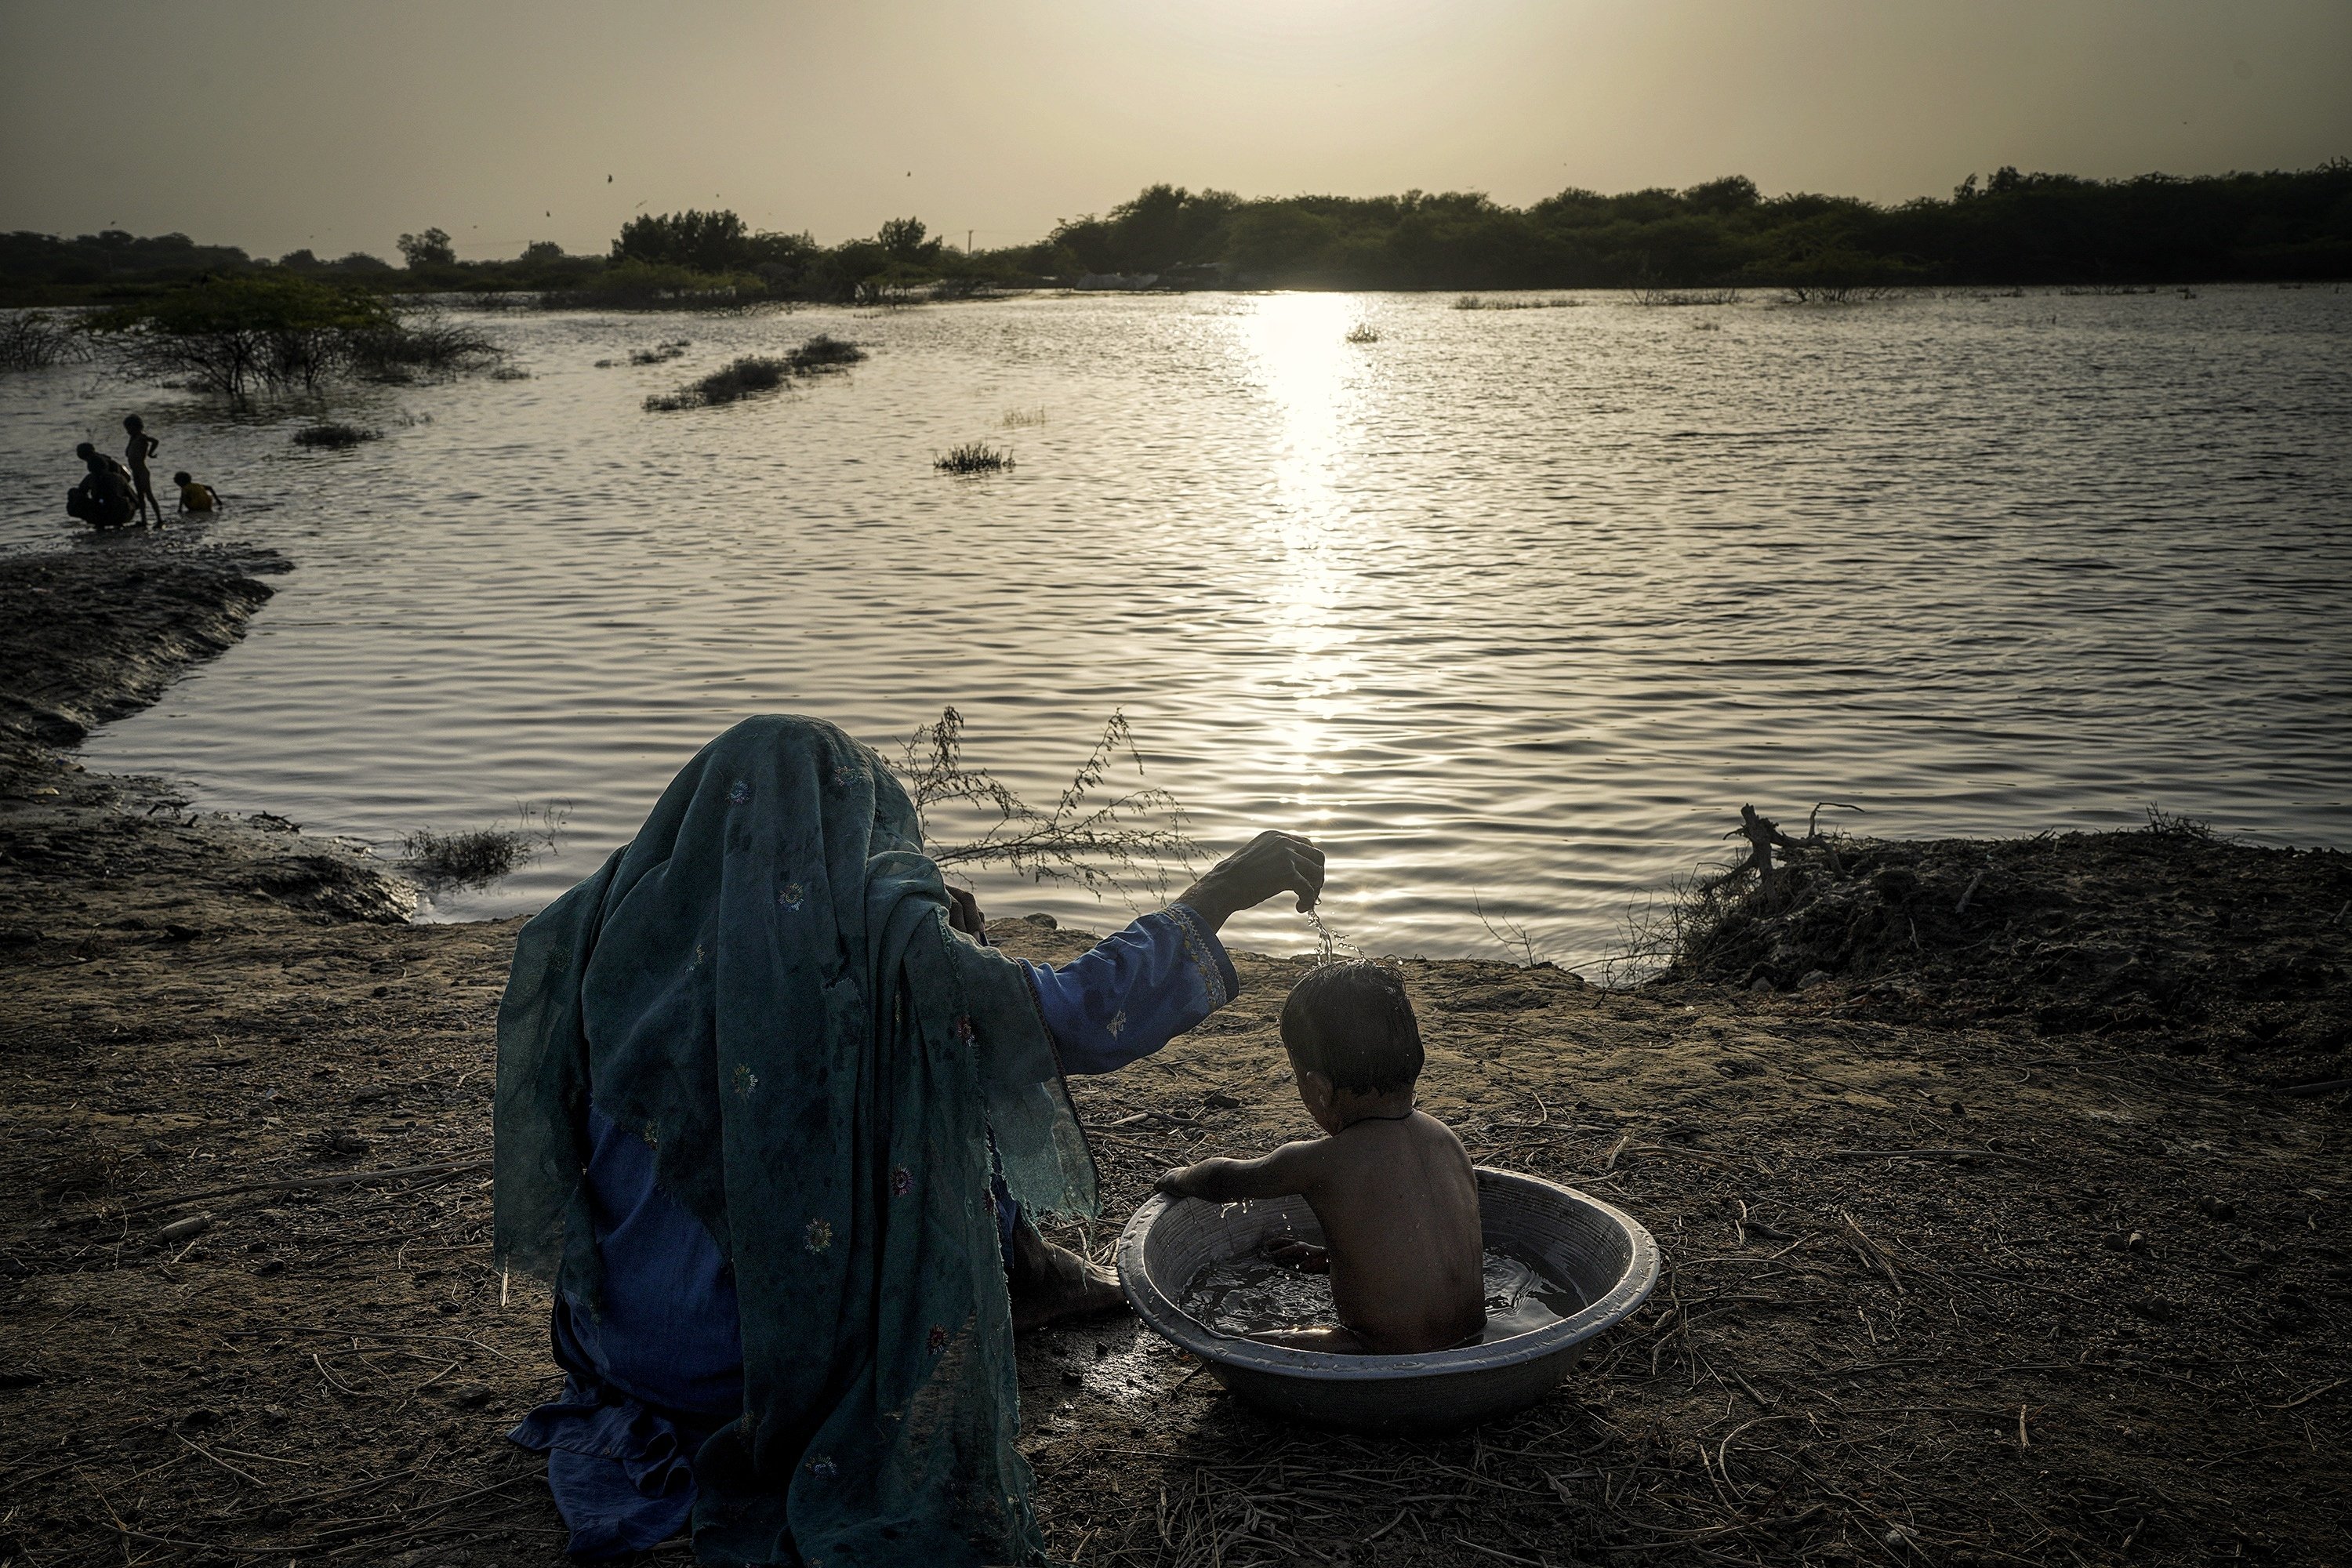 A woman washes her child by the river, in Sindh, Pakistan, Sept. 18, 2022. (PHOTO BY UĞUR YILDIRIM) 